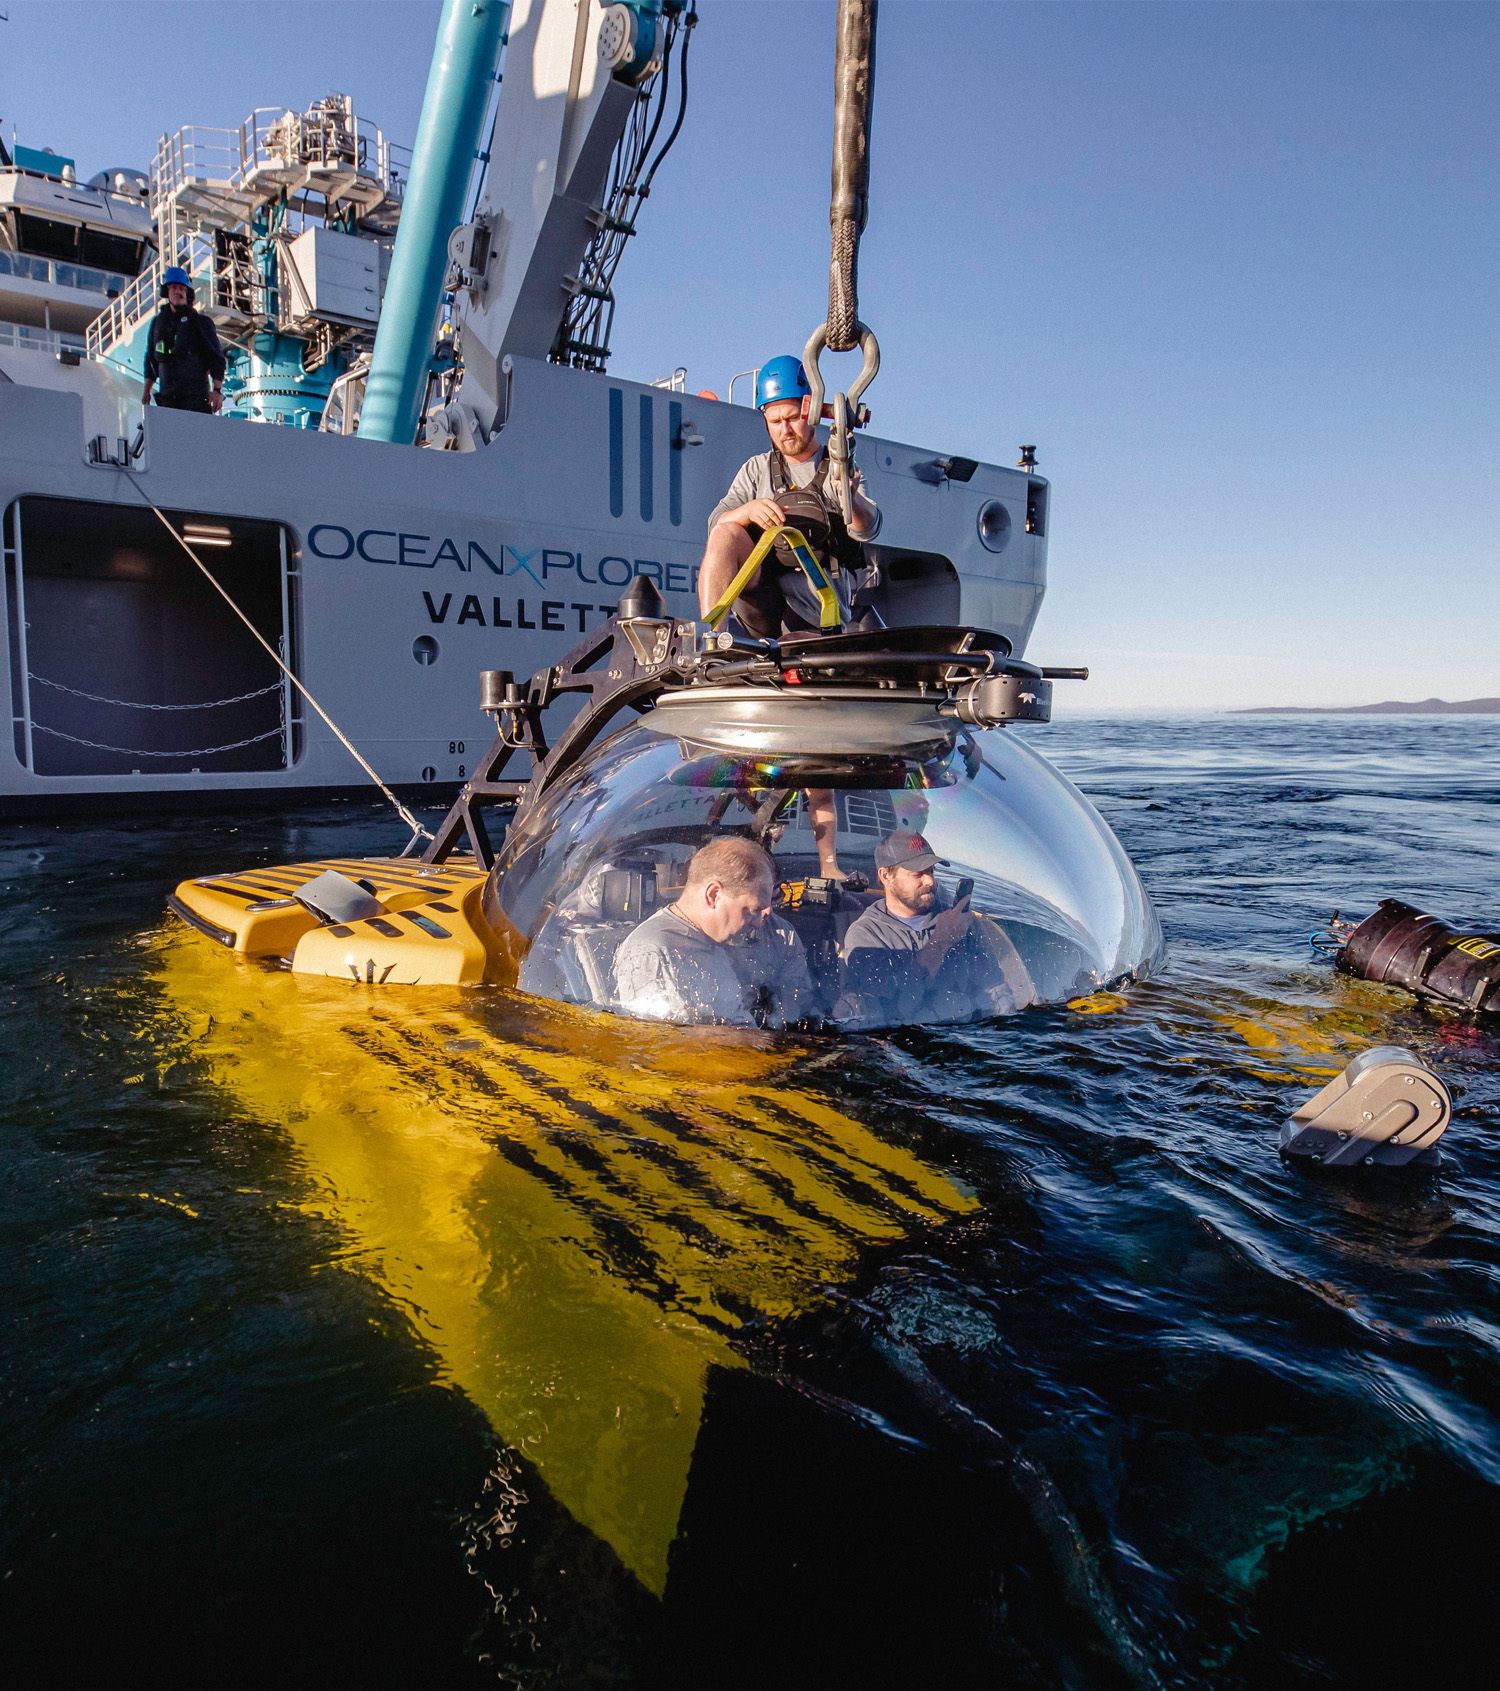 With a pilot and two passengers, the two Triton submersibles aboard OceanXplorer give marine scientists a wide lens to explore, conduct scientific research, film and share ocean wonders with the public.